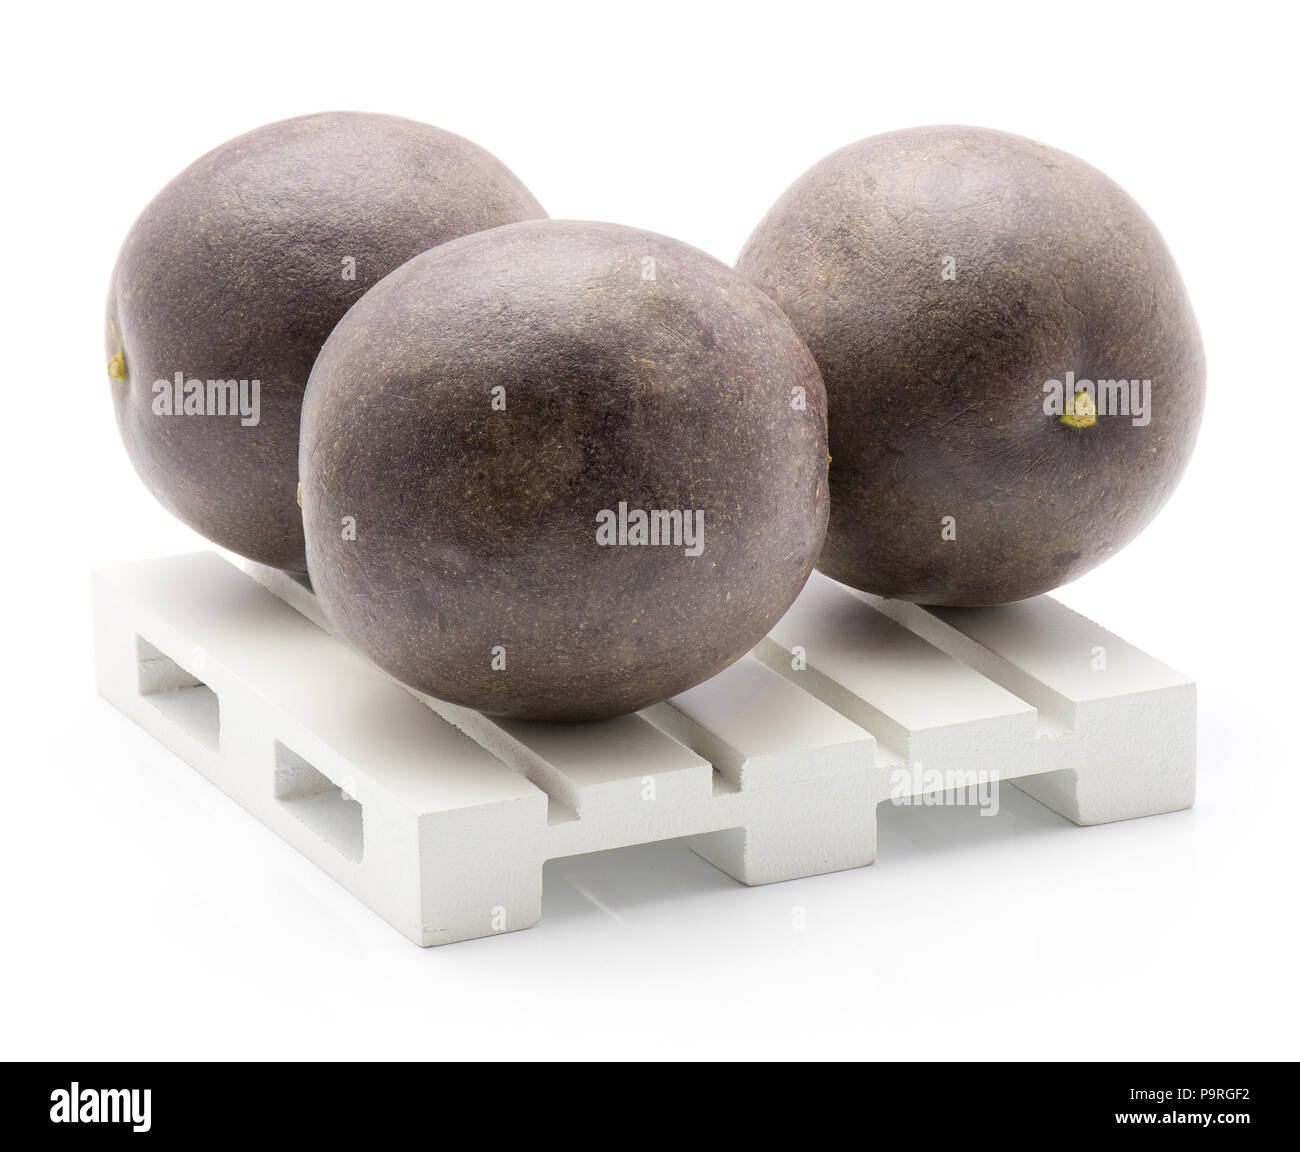 Three passion fruits on a pallet isolated on white background Stock Photo